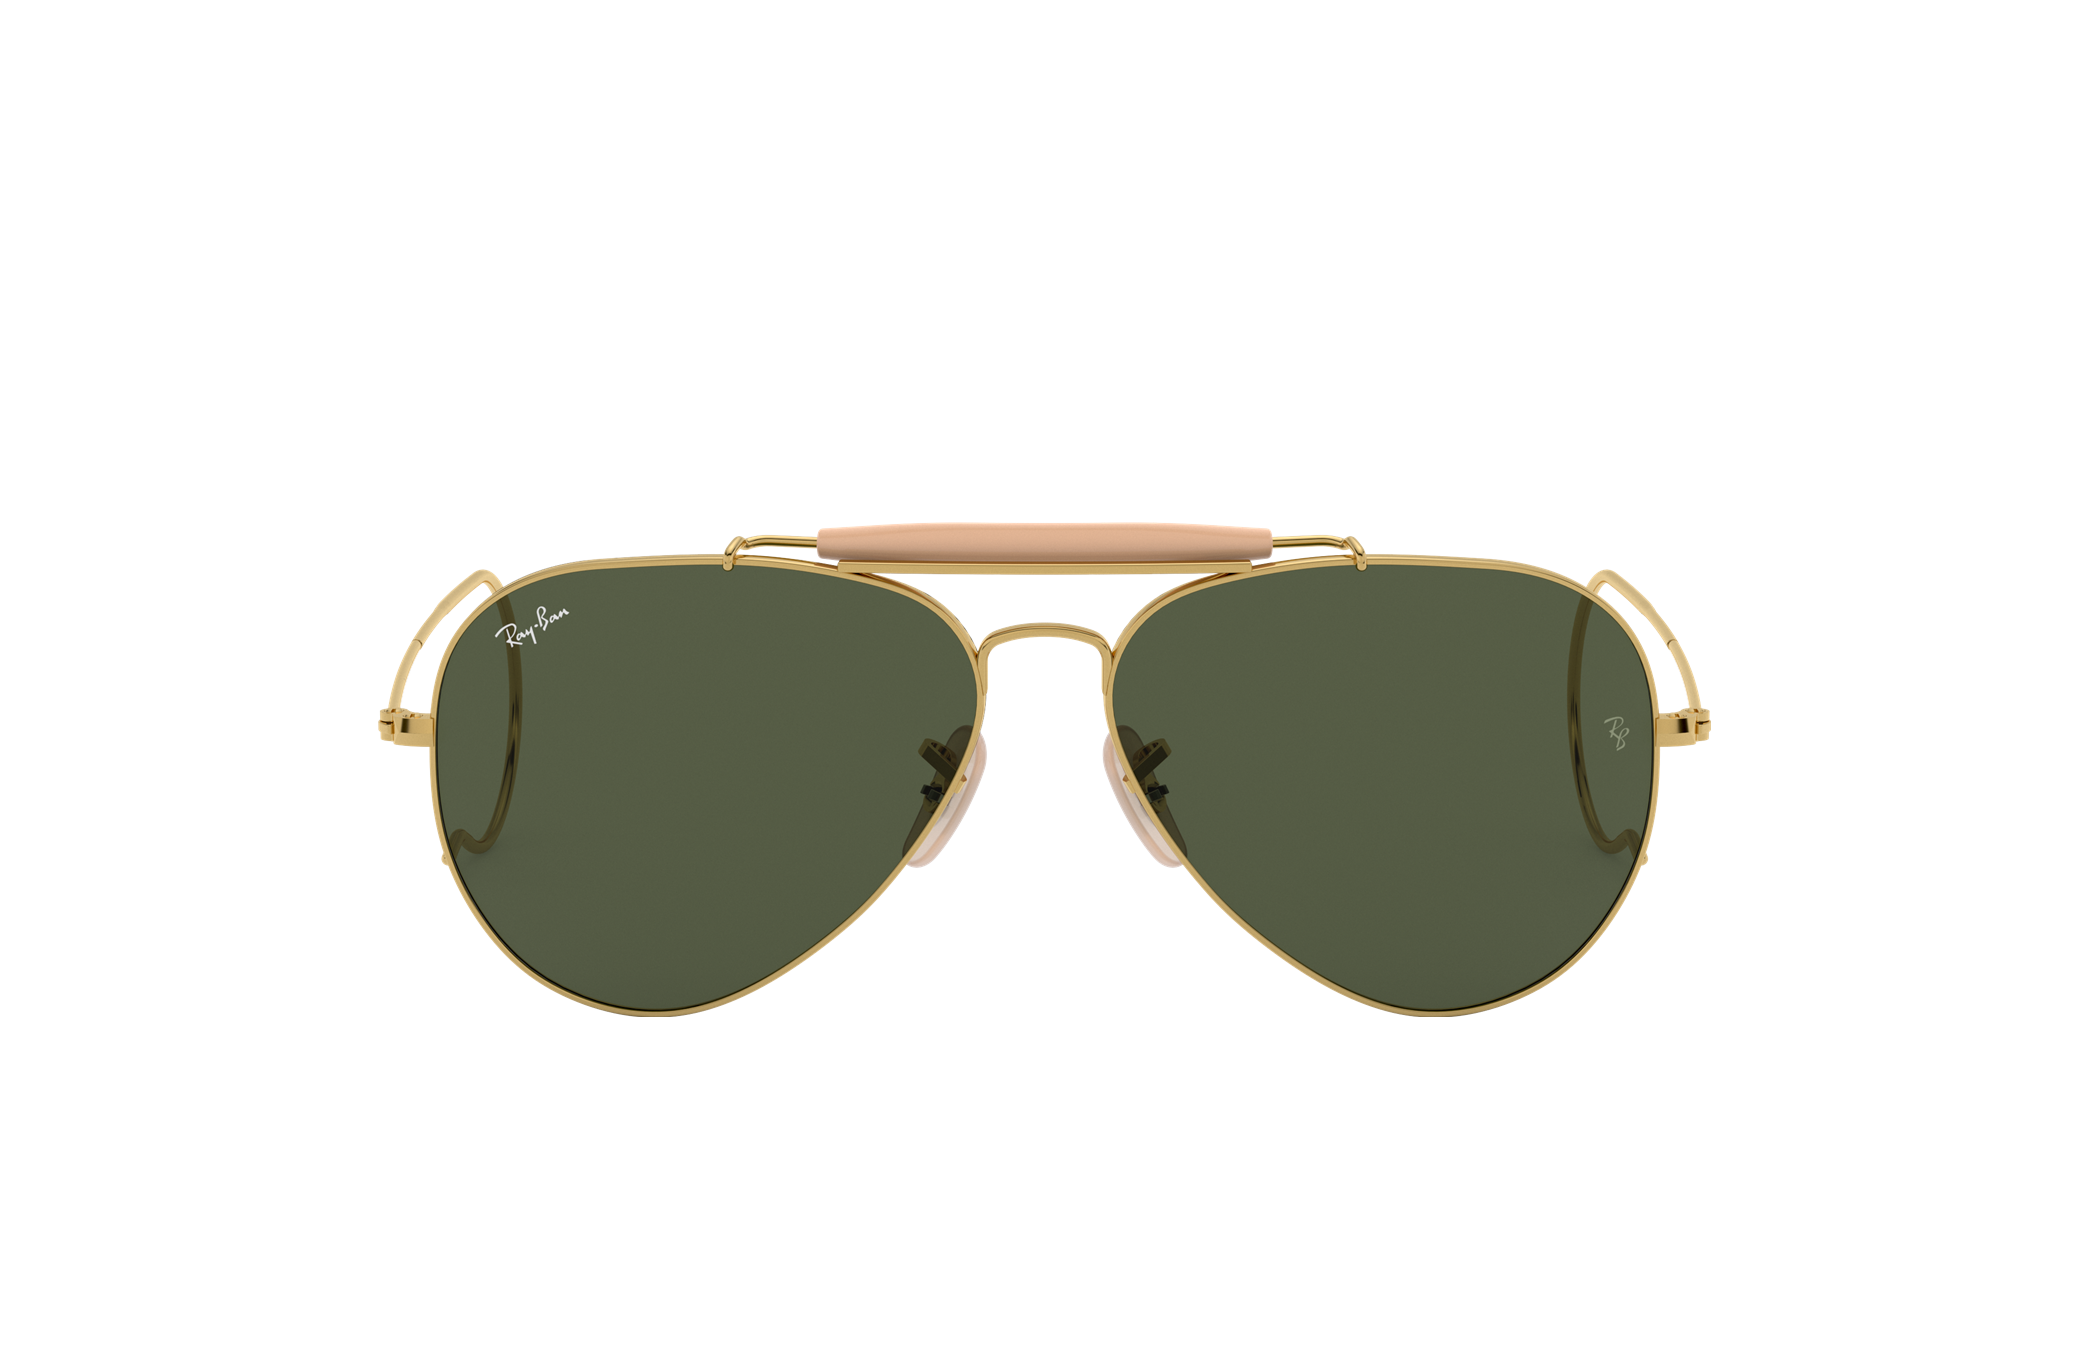 Buy Ray Ban Sunglasses Men Online In India - Etsy India